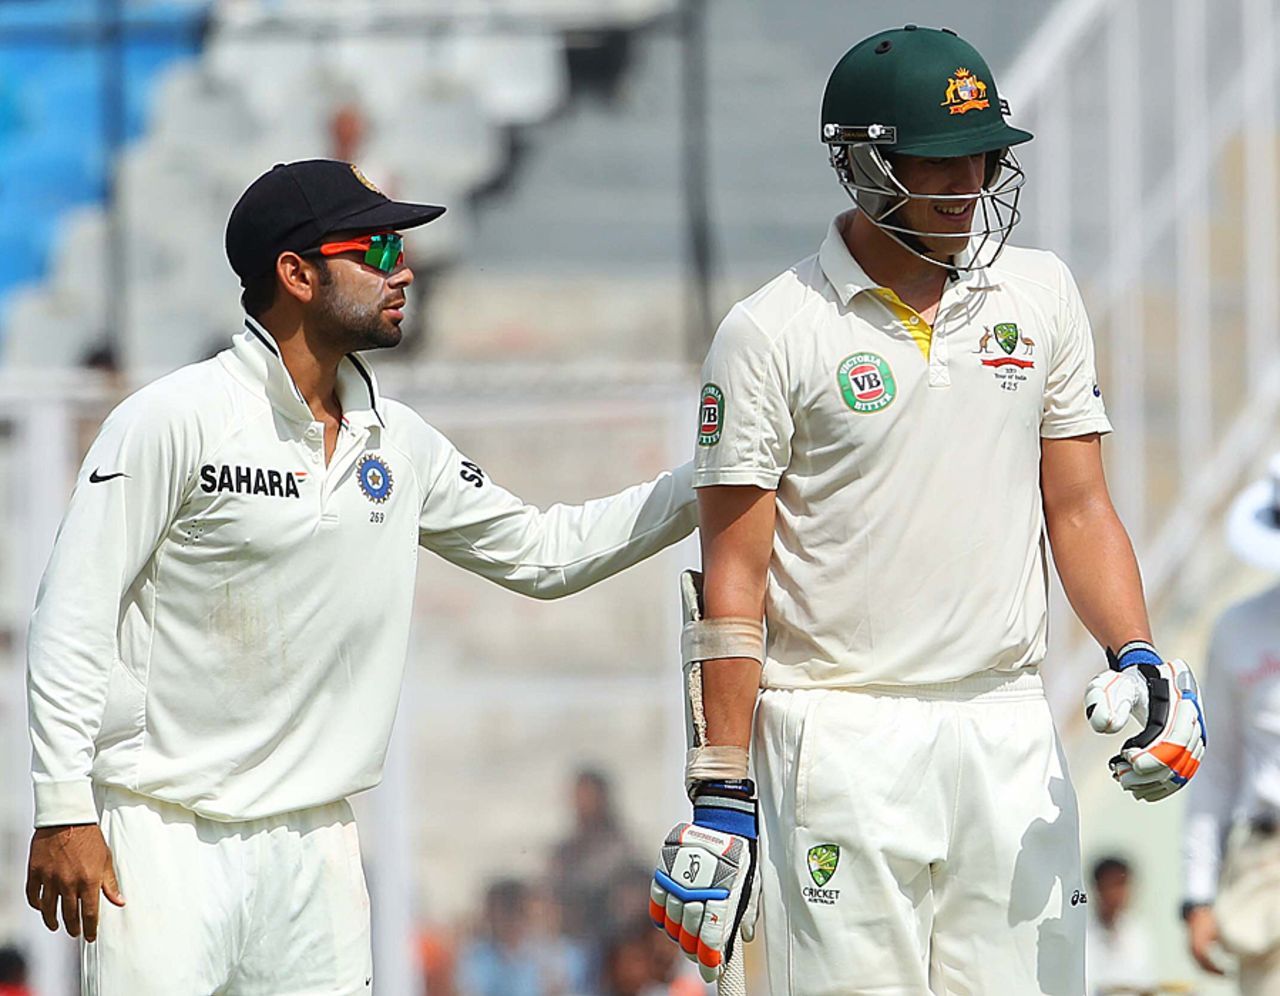 Mitchell Starc is patted on the back by Virat Kohli after being dismissed for 99, India v Australia, 3rd Test, Mohali, 3rd day, March 16, 2013